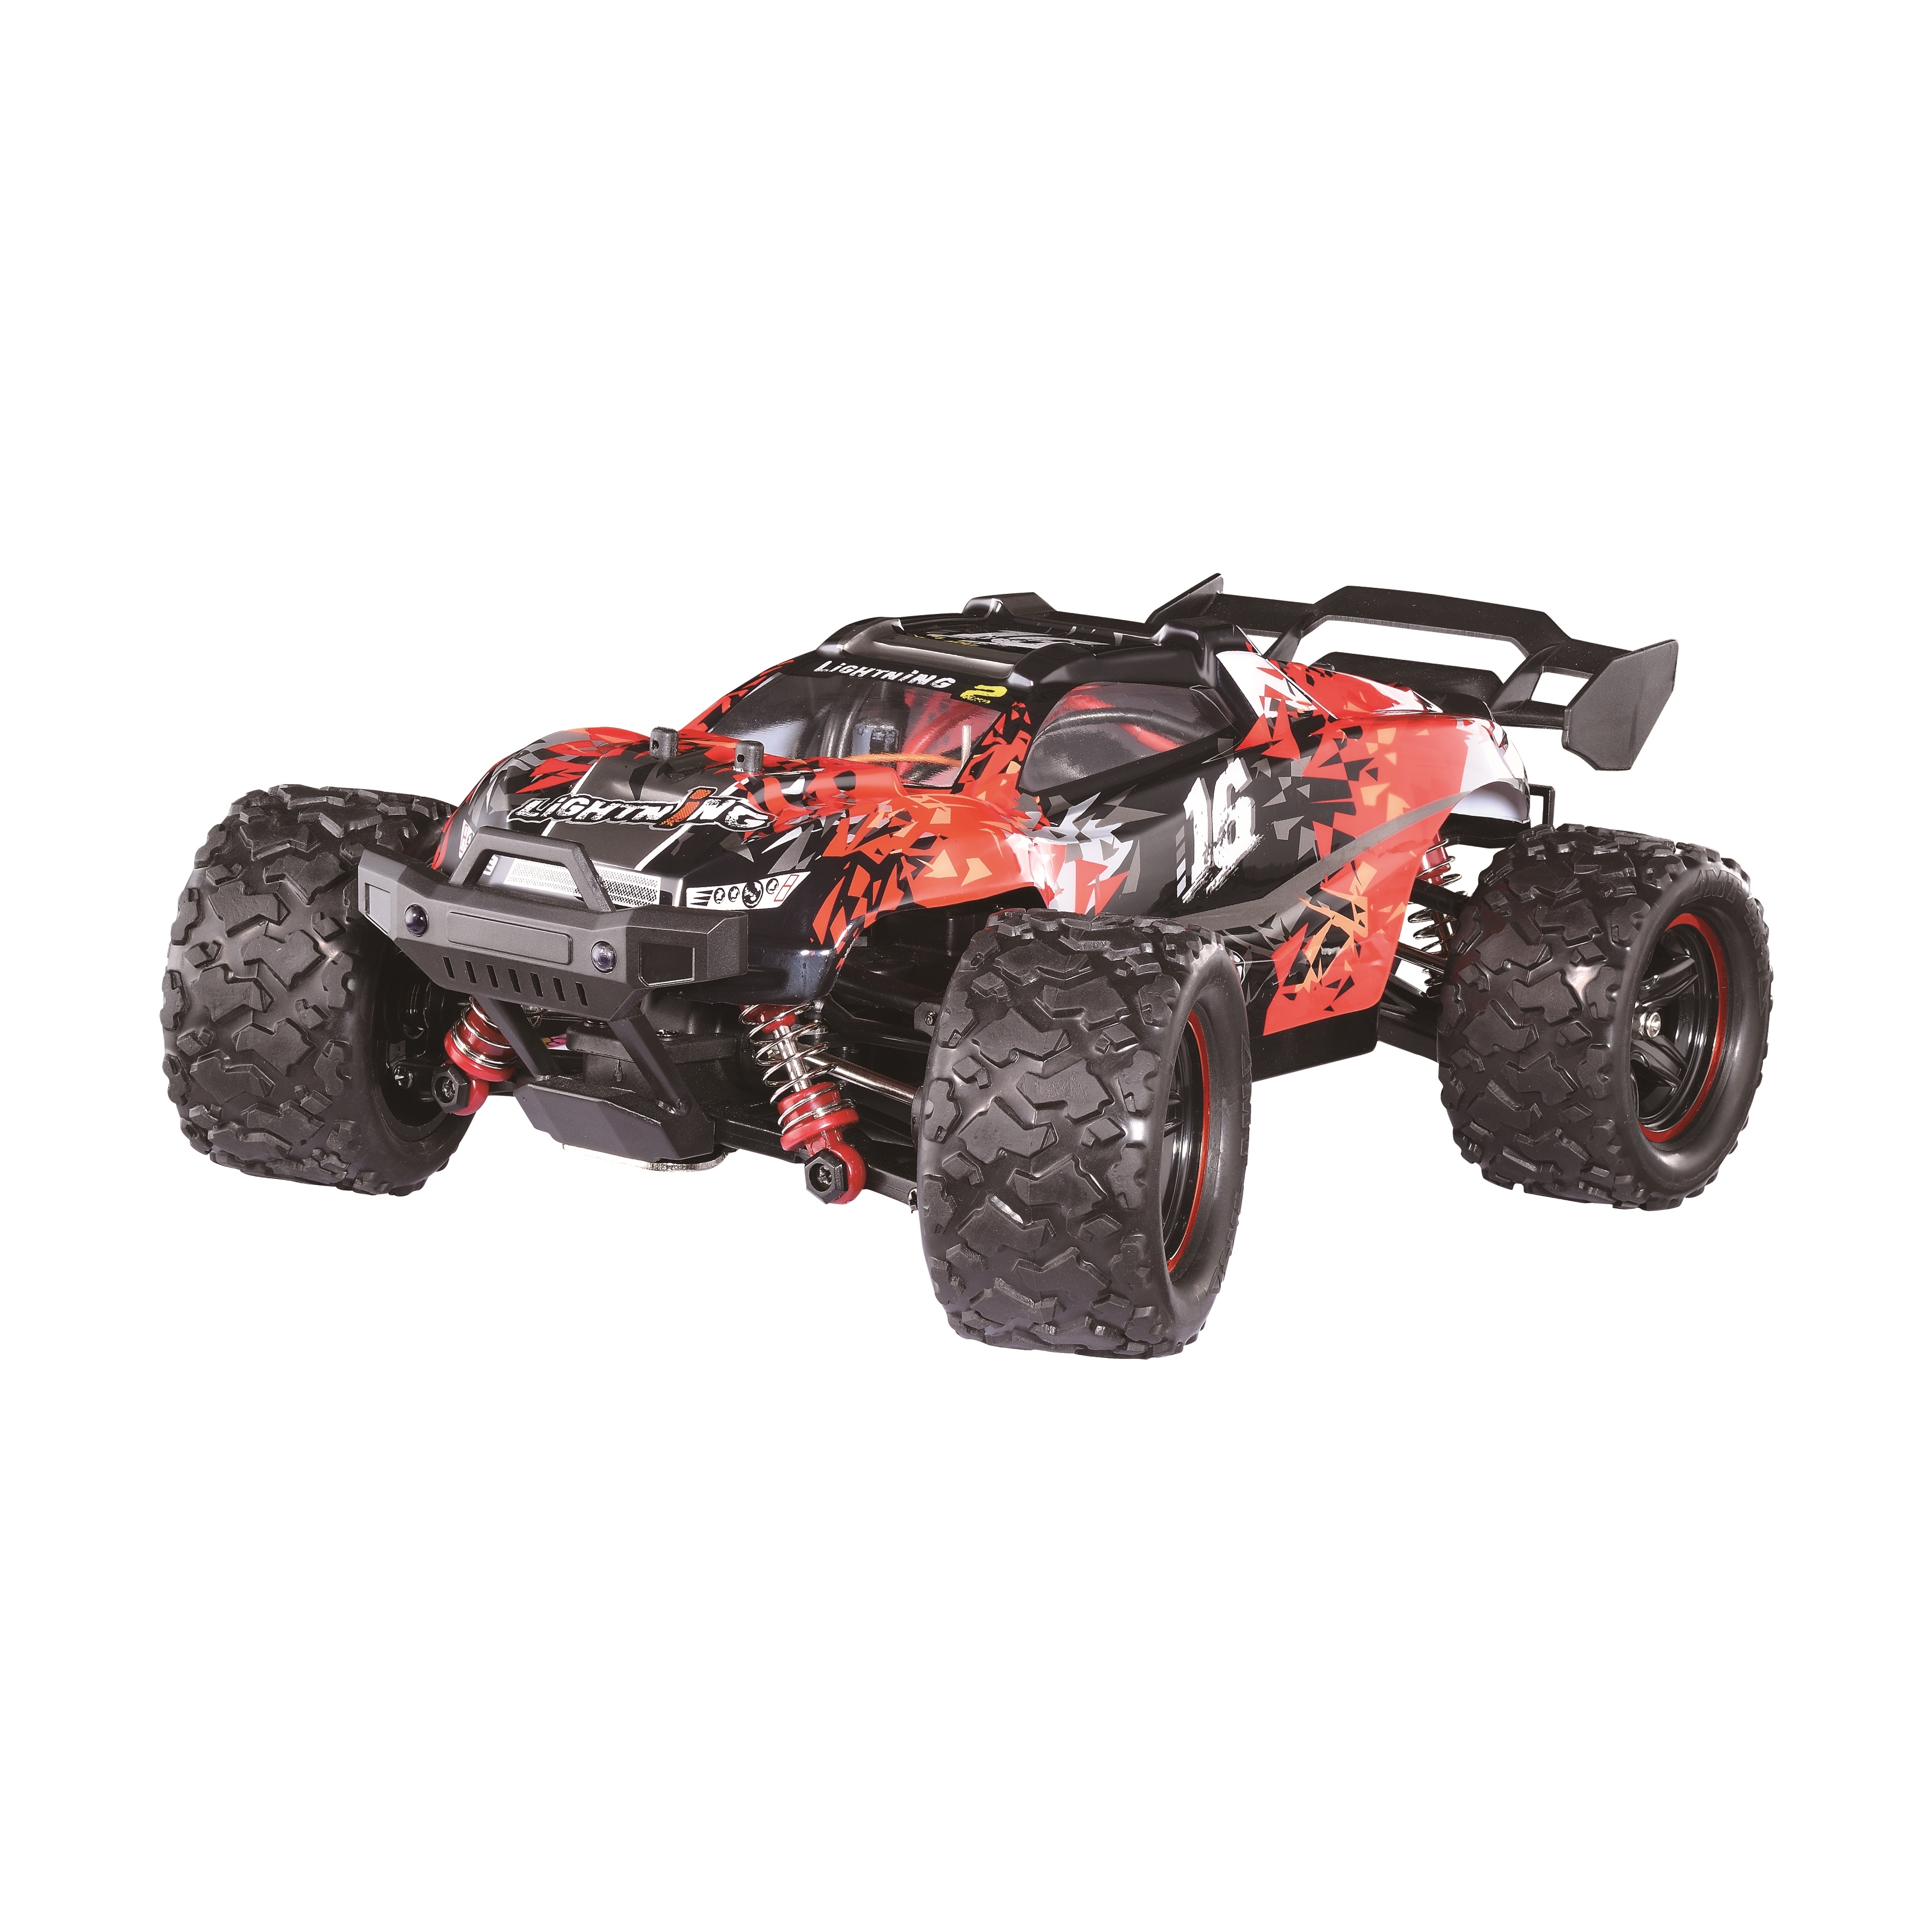 HS 18421 18422 18423 1/18 2.4G Alloy Brushless Off Road High Speed RC Car Vehicle Models Full Proportional Control Red 1 battery